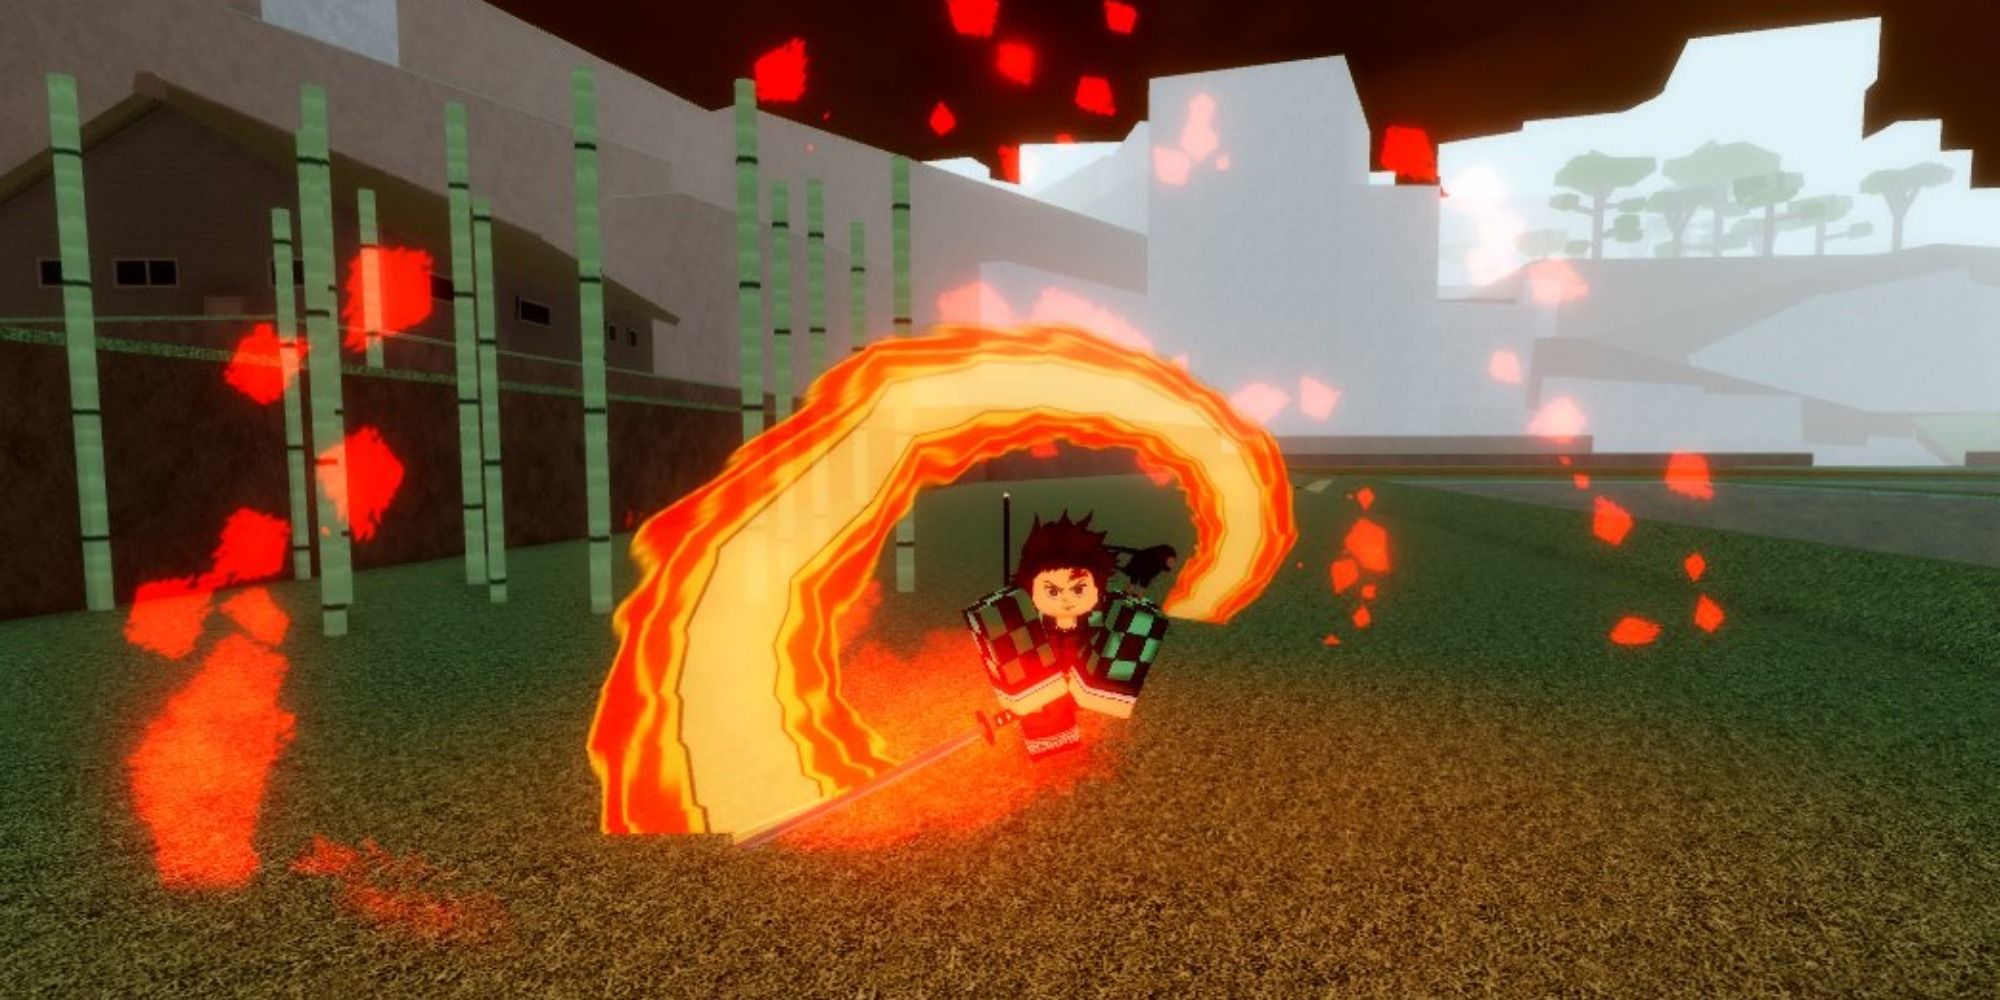 Roblox Demon Slayer Rpg 2 Codes For Breathing And More Game Thought Com - game of demons on roblox